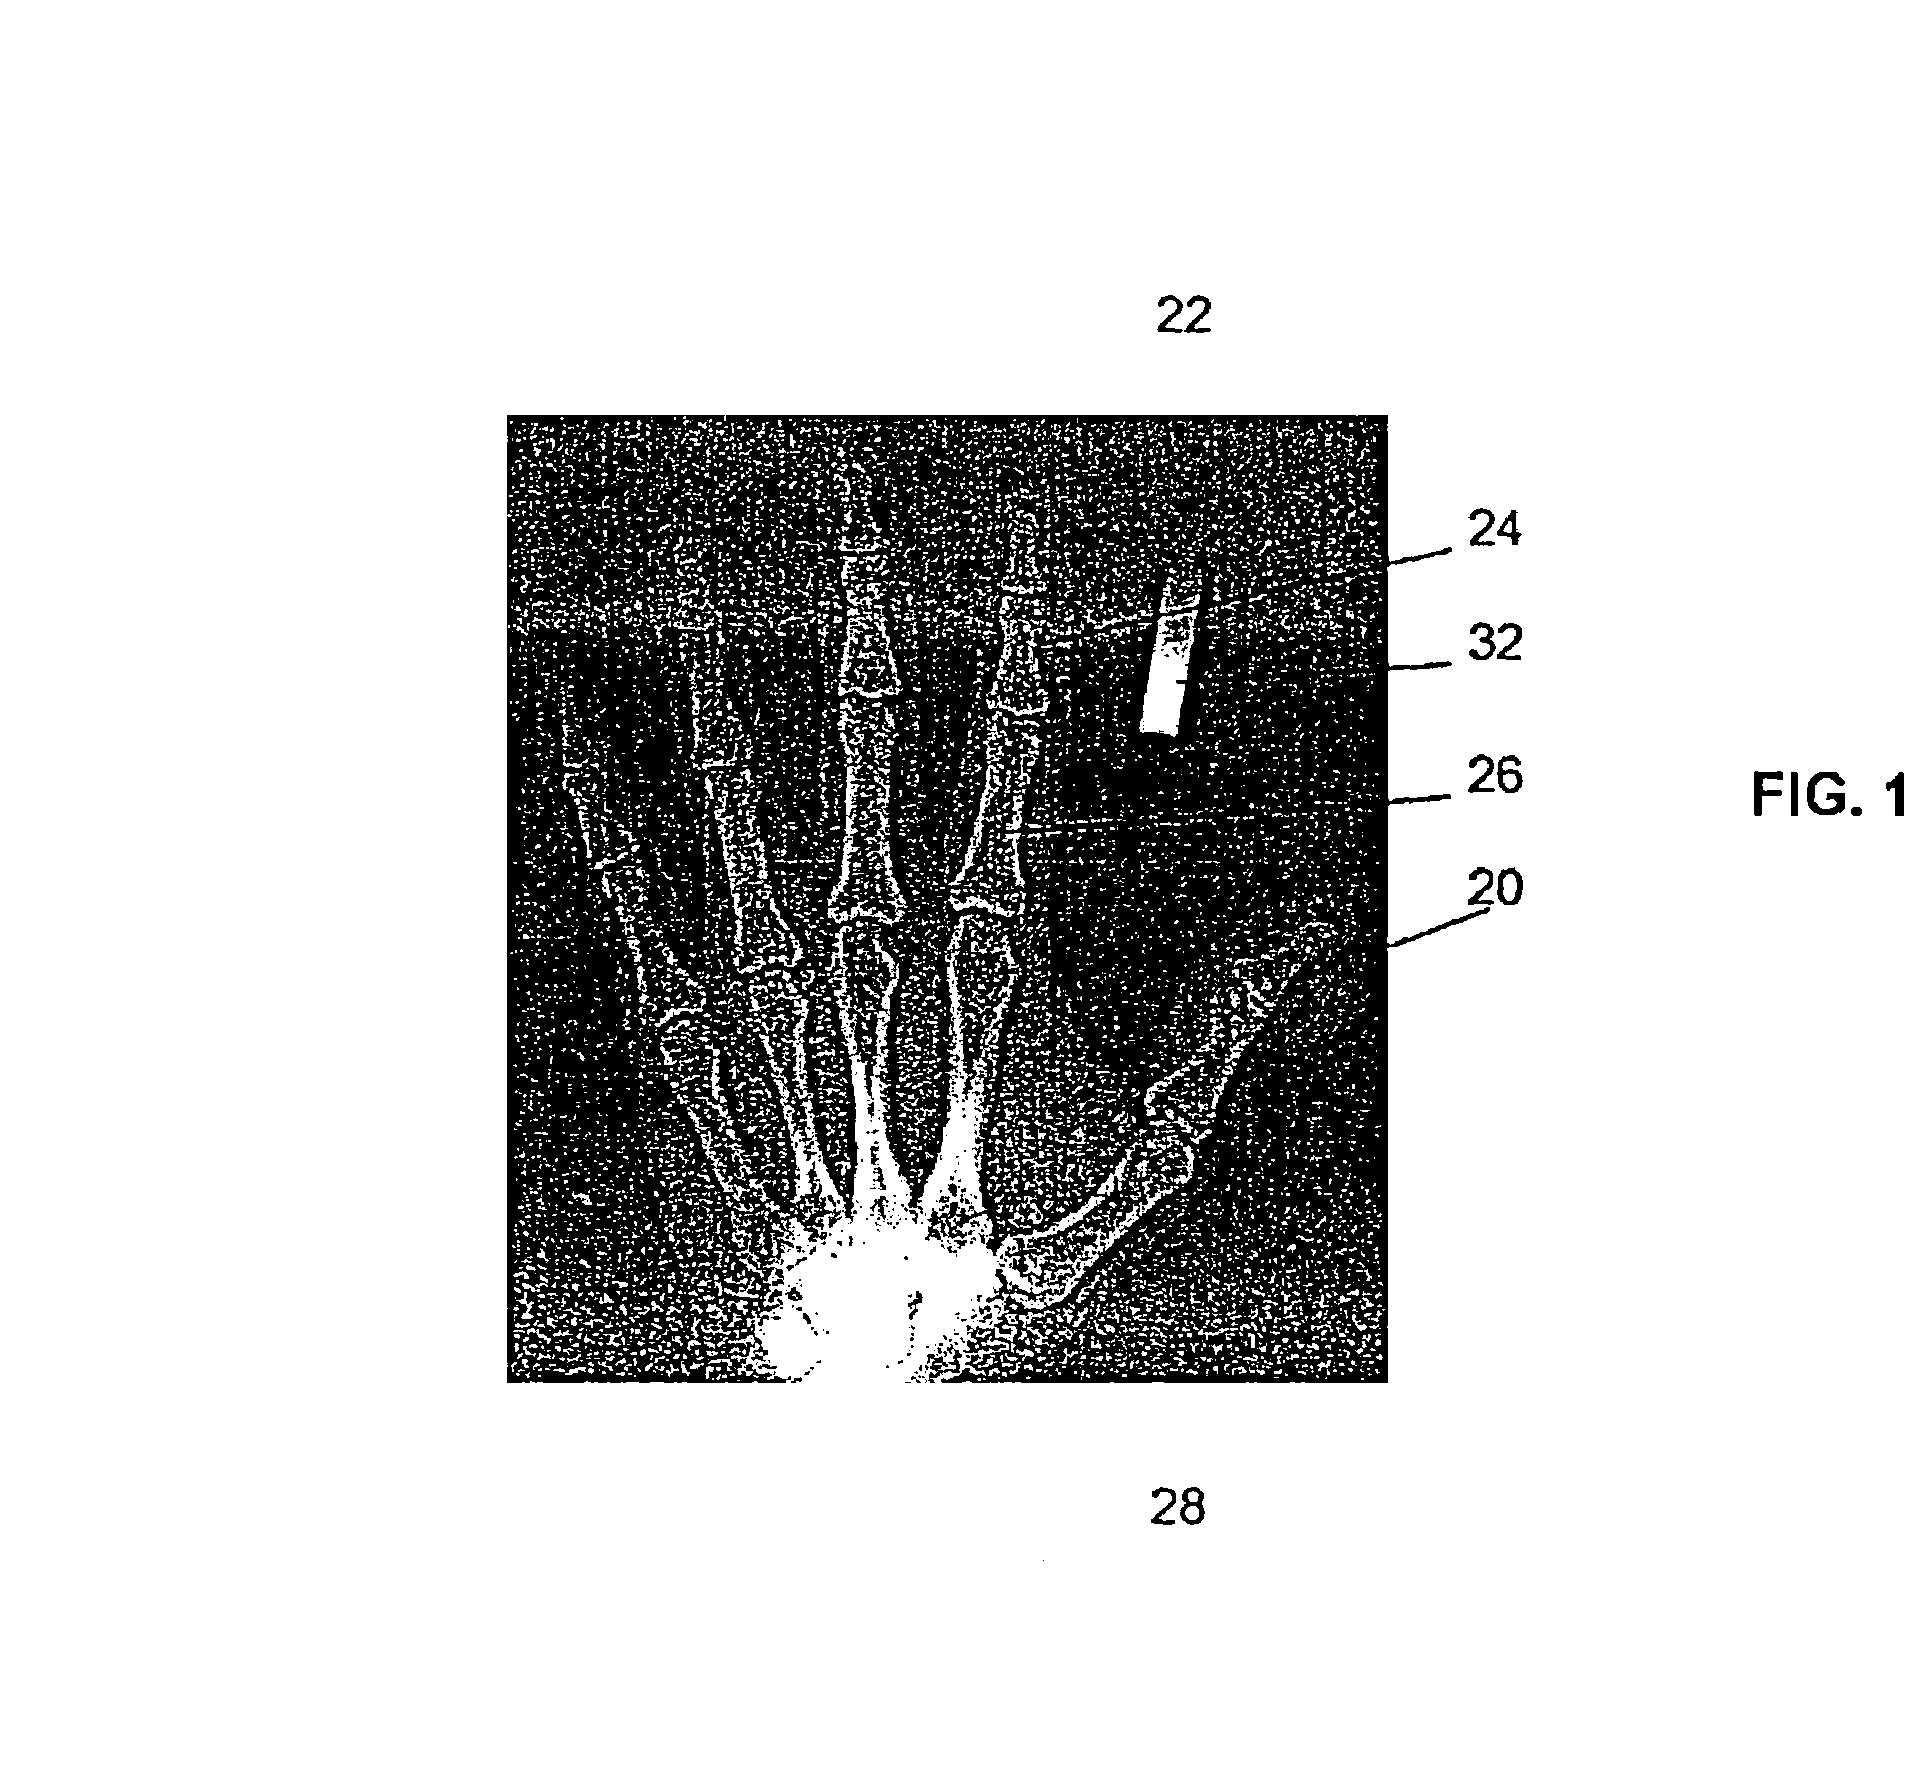 Method, code, and system for assaying joint deformity